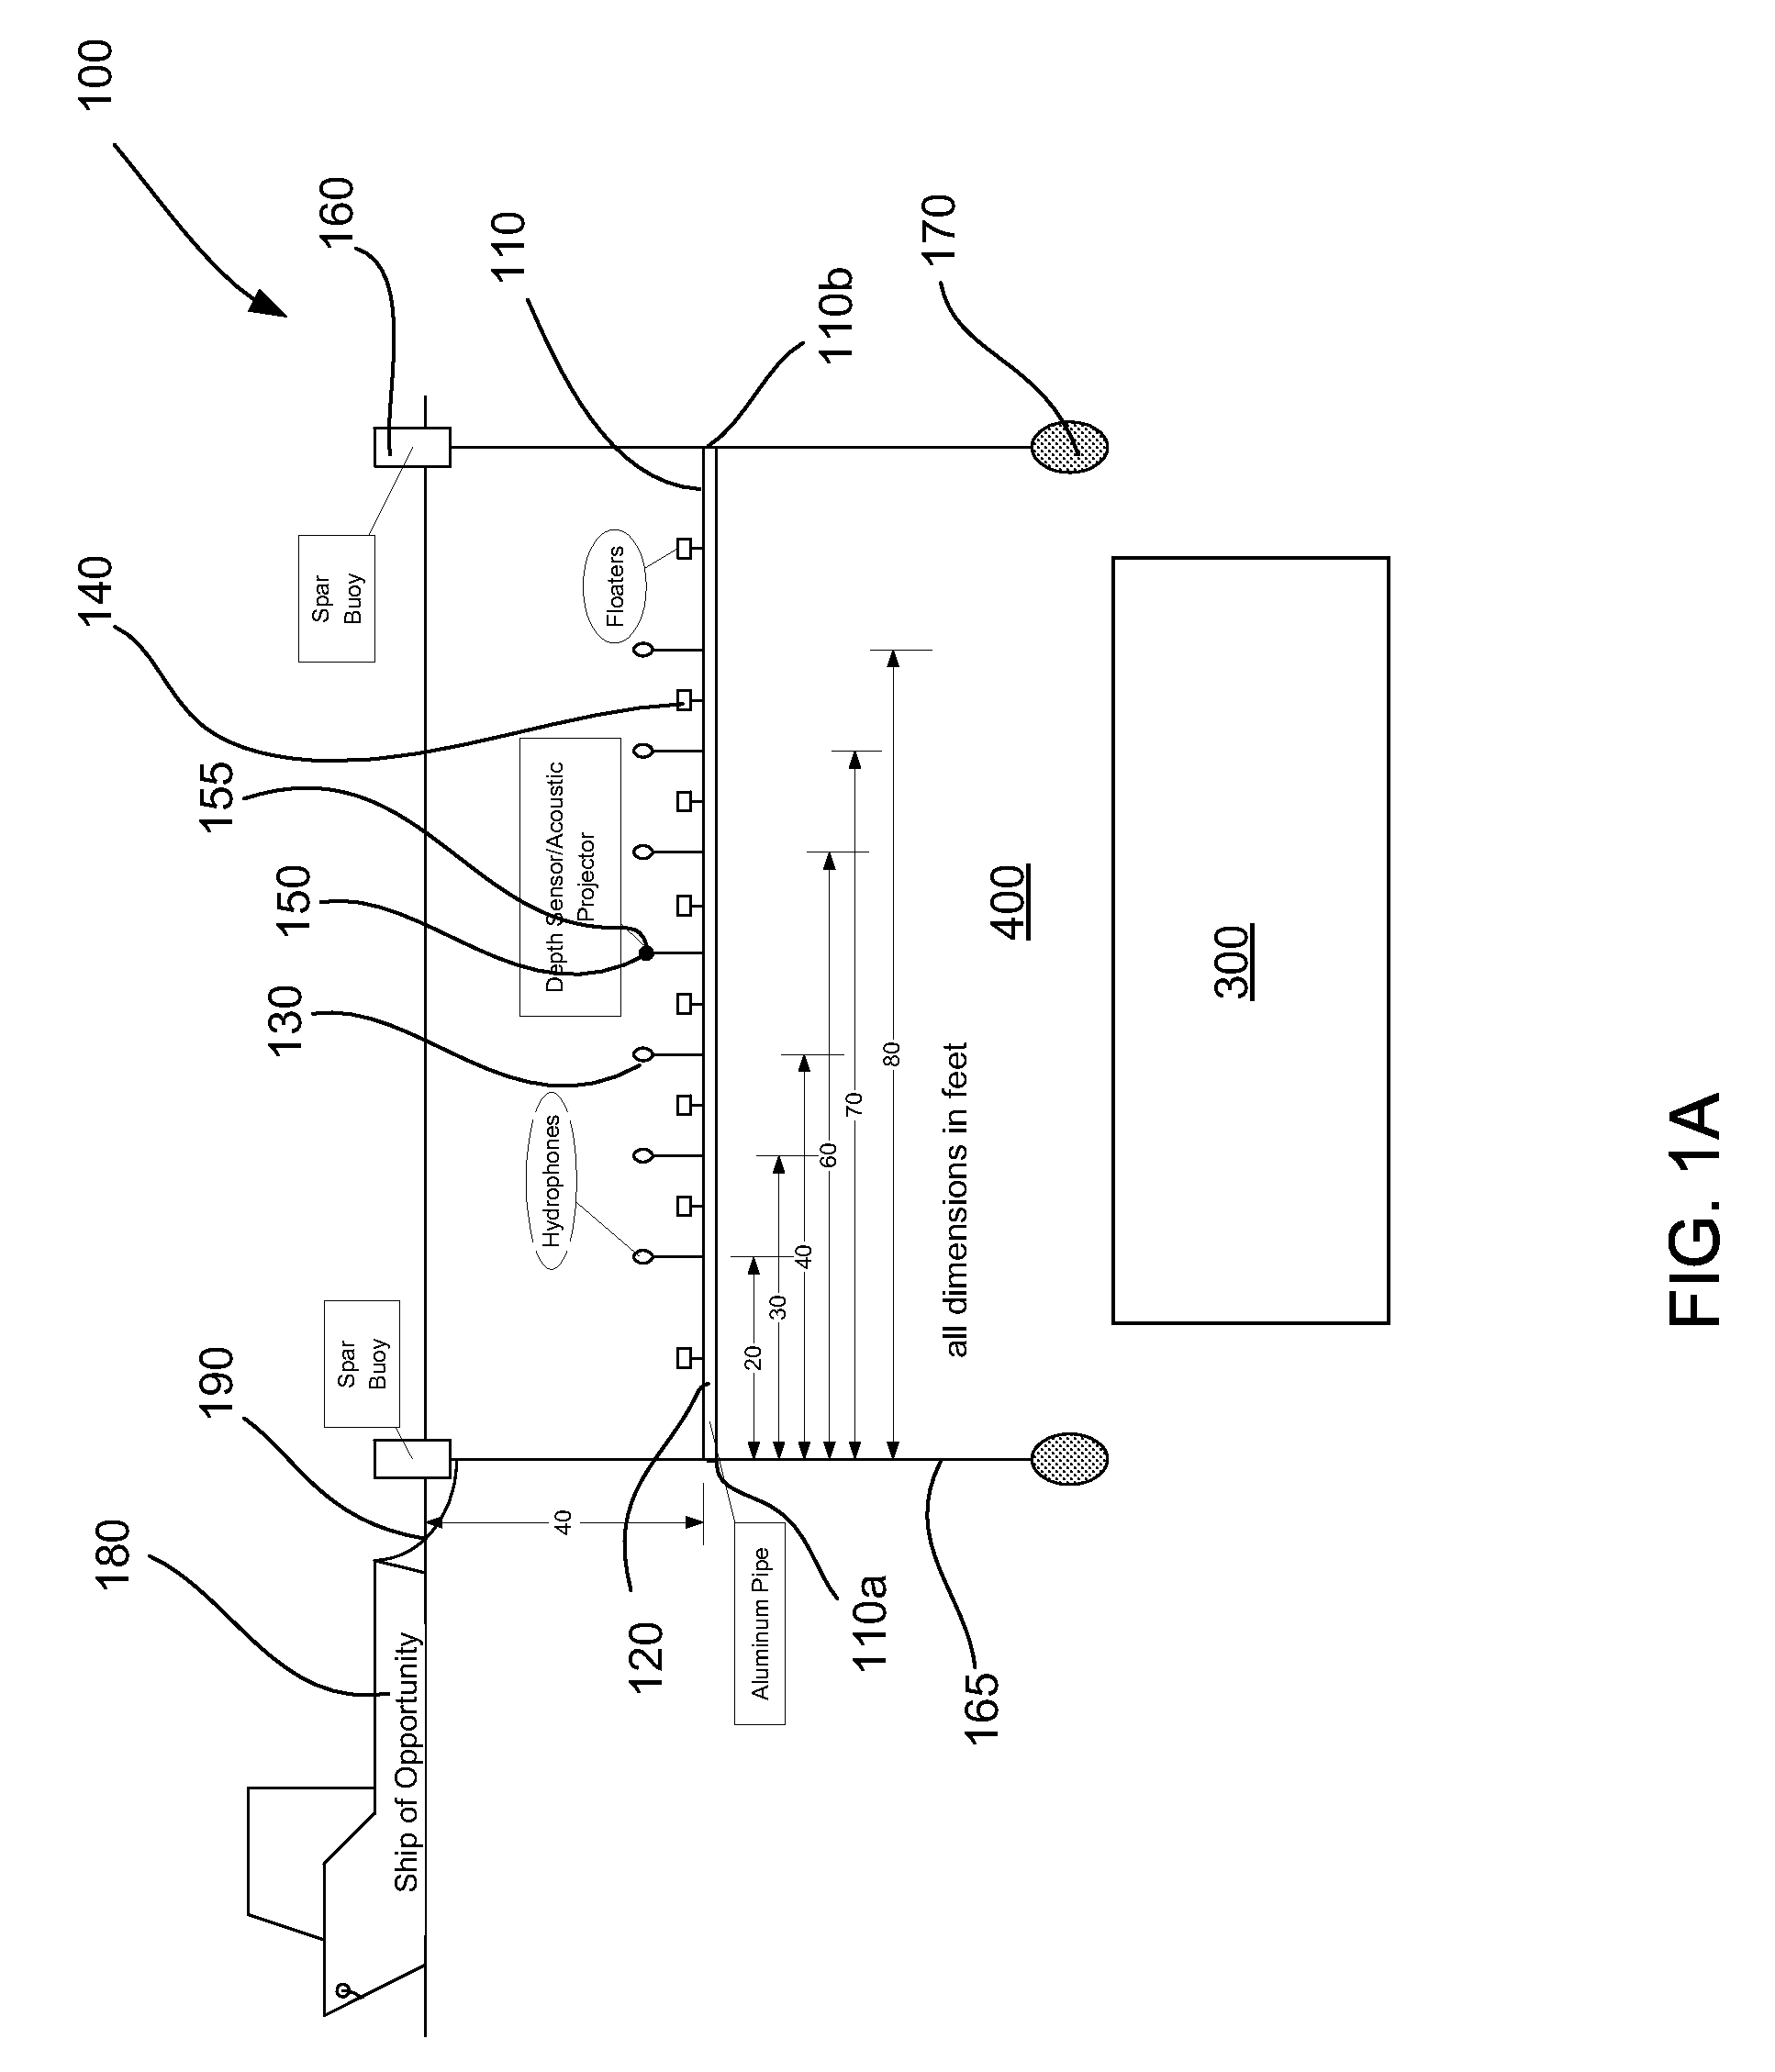 System for measuring acoustic signature of an object in water